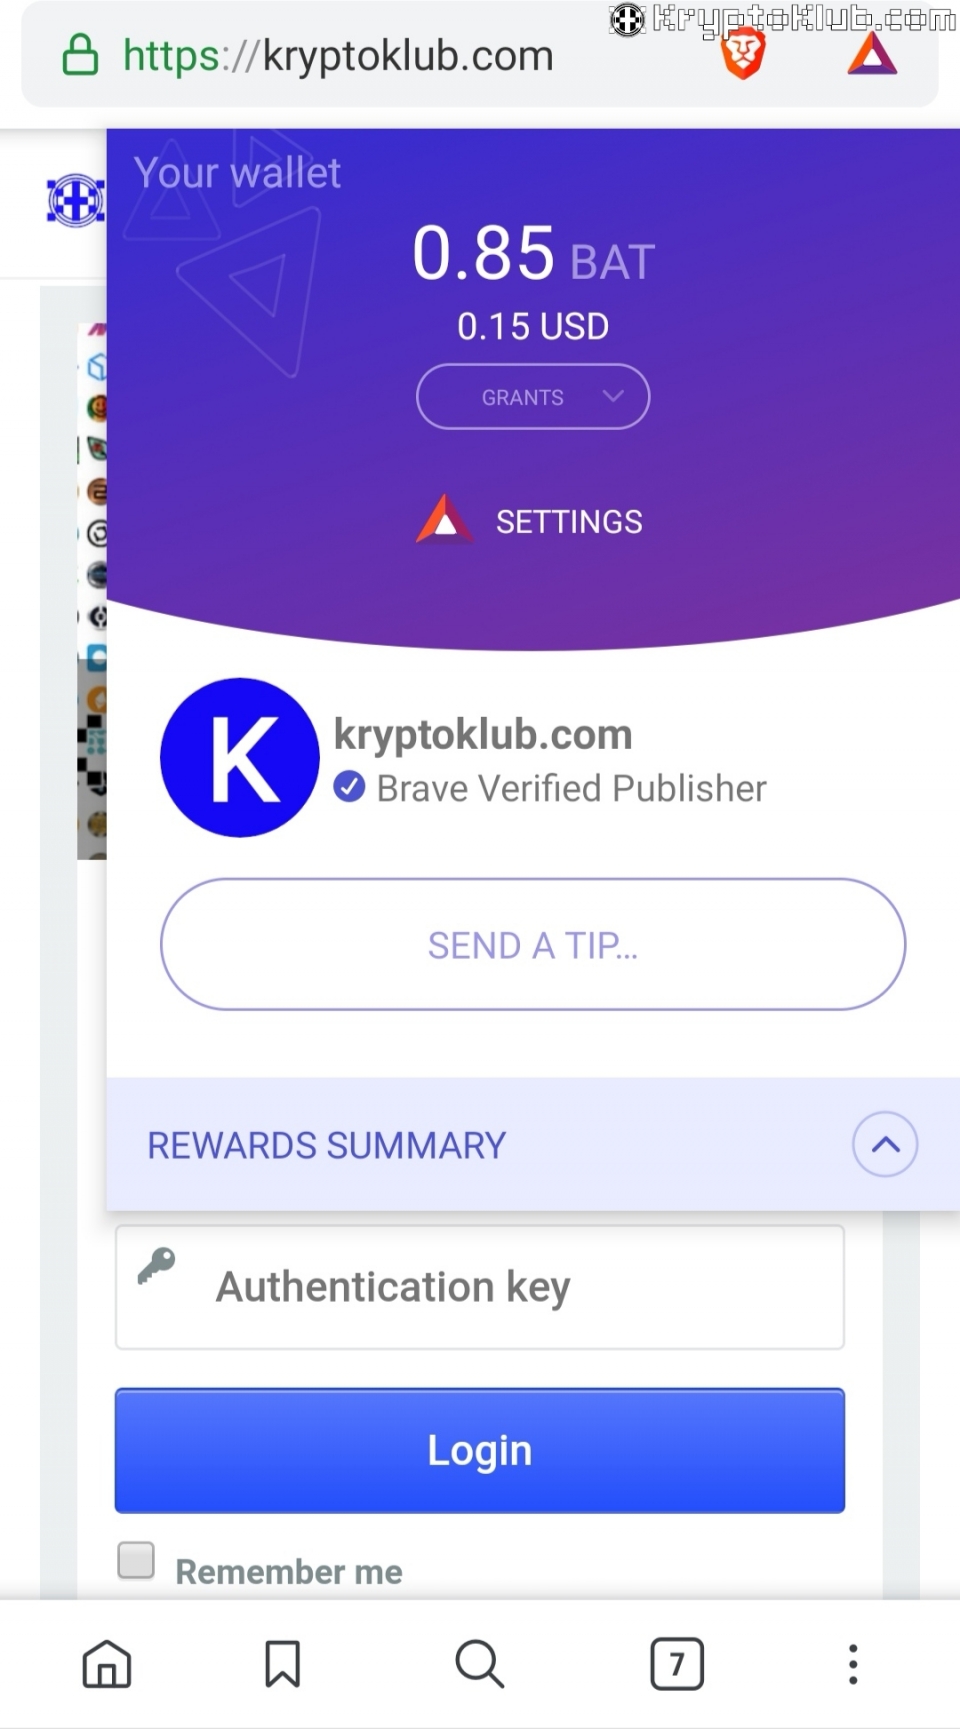 KRYPTOKLUB.com is a Brave Verified Publisher and can receive BAT Tips by the KRYPTO KLUB Community.